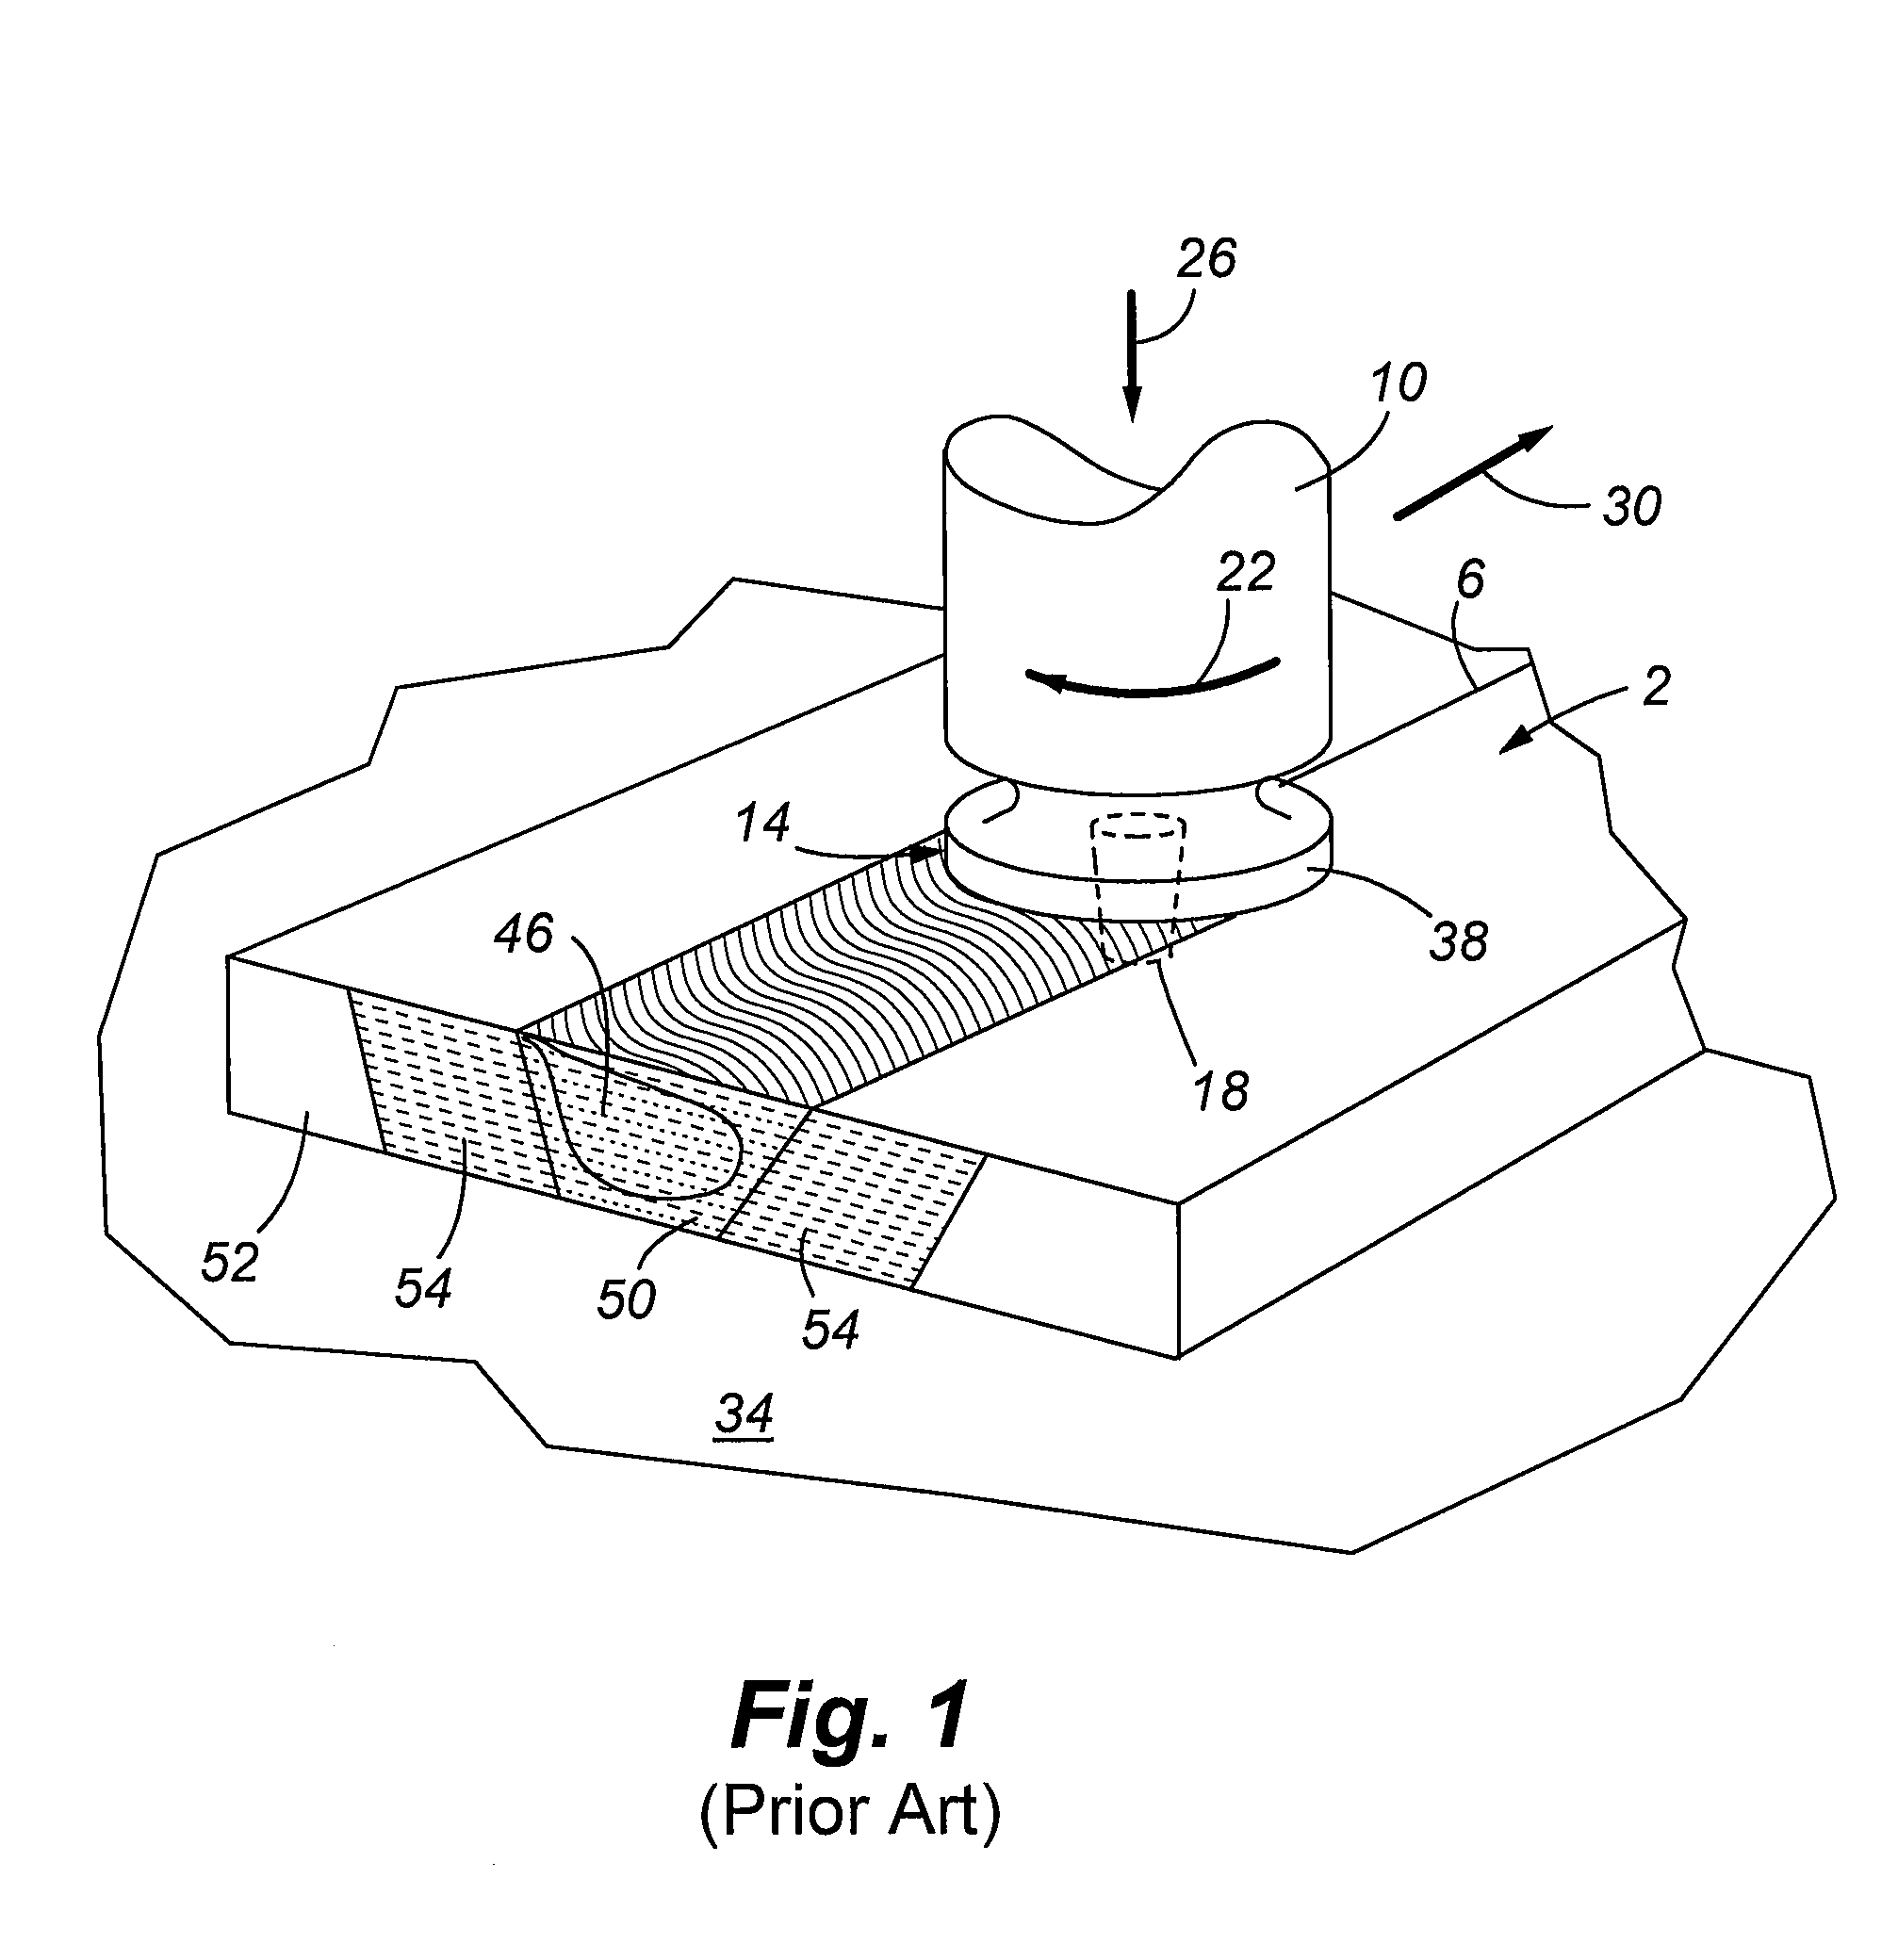 Friction welding apparatus, system and method